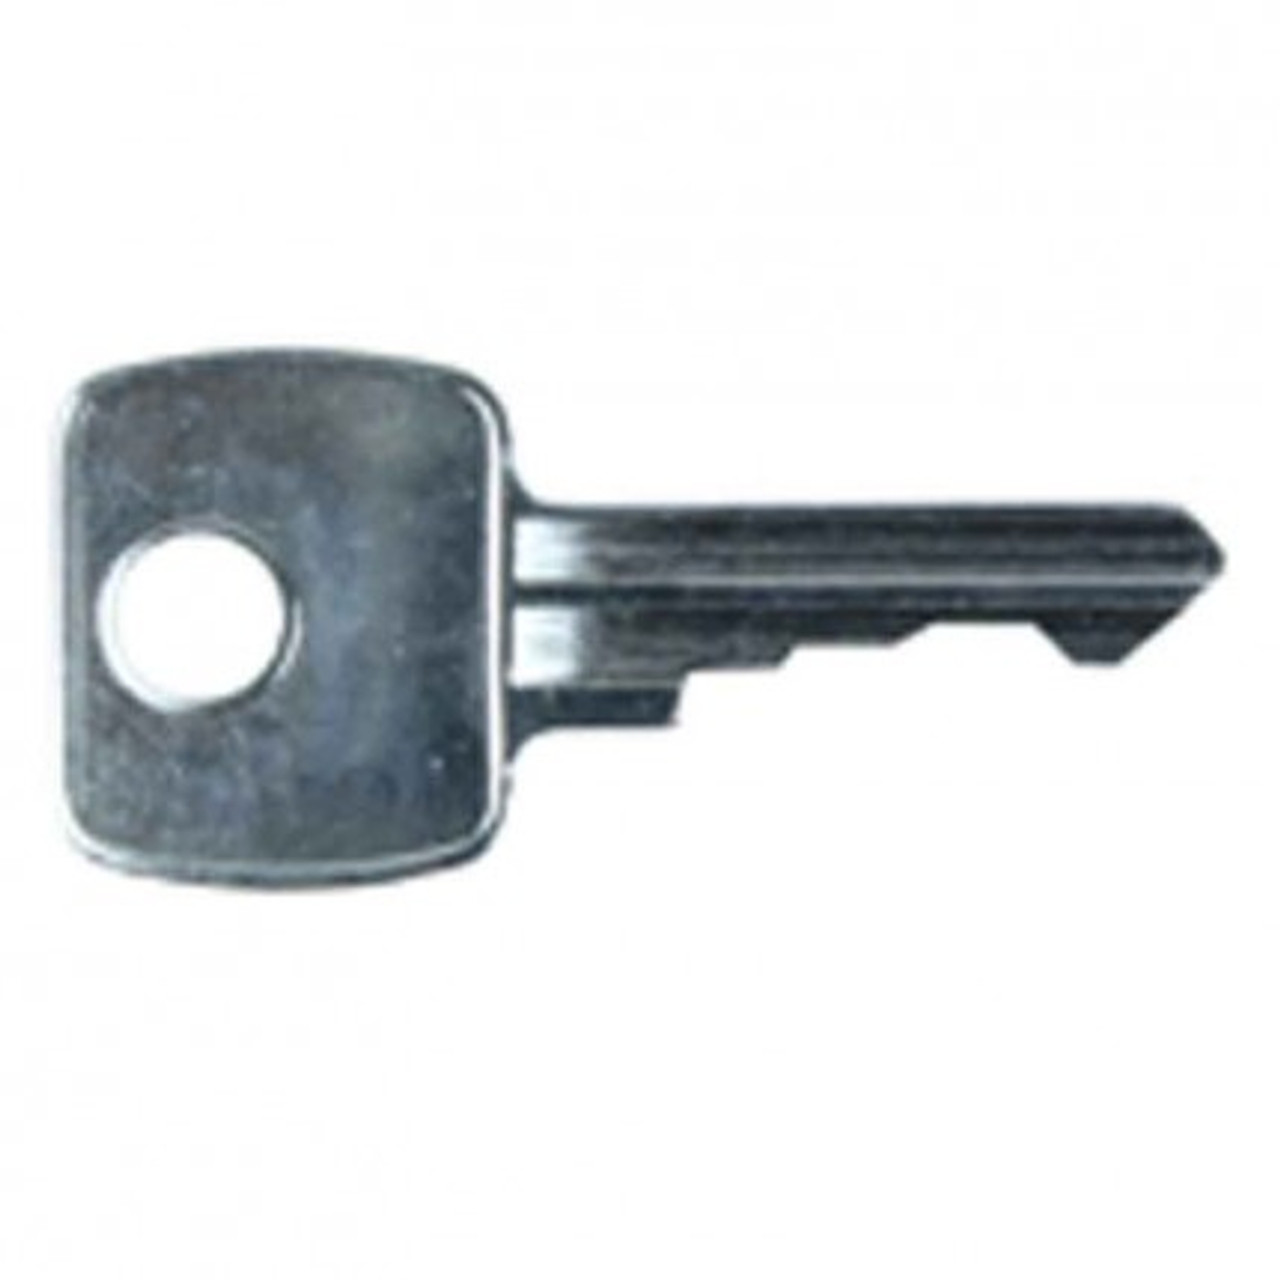 Replace Missing File Cabinet Key Replacements